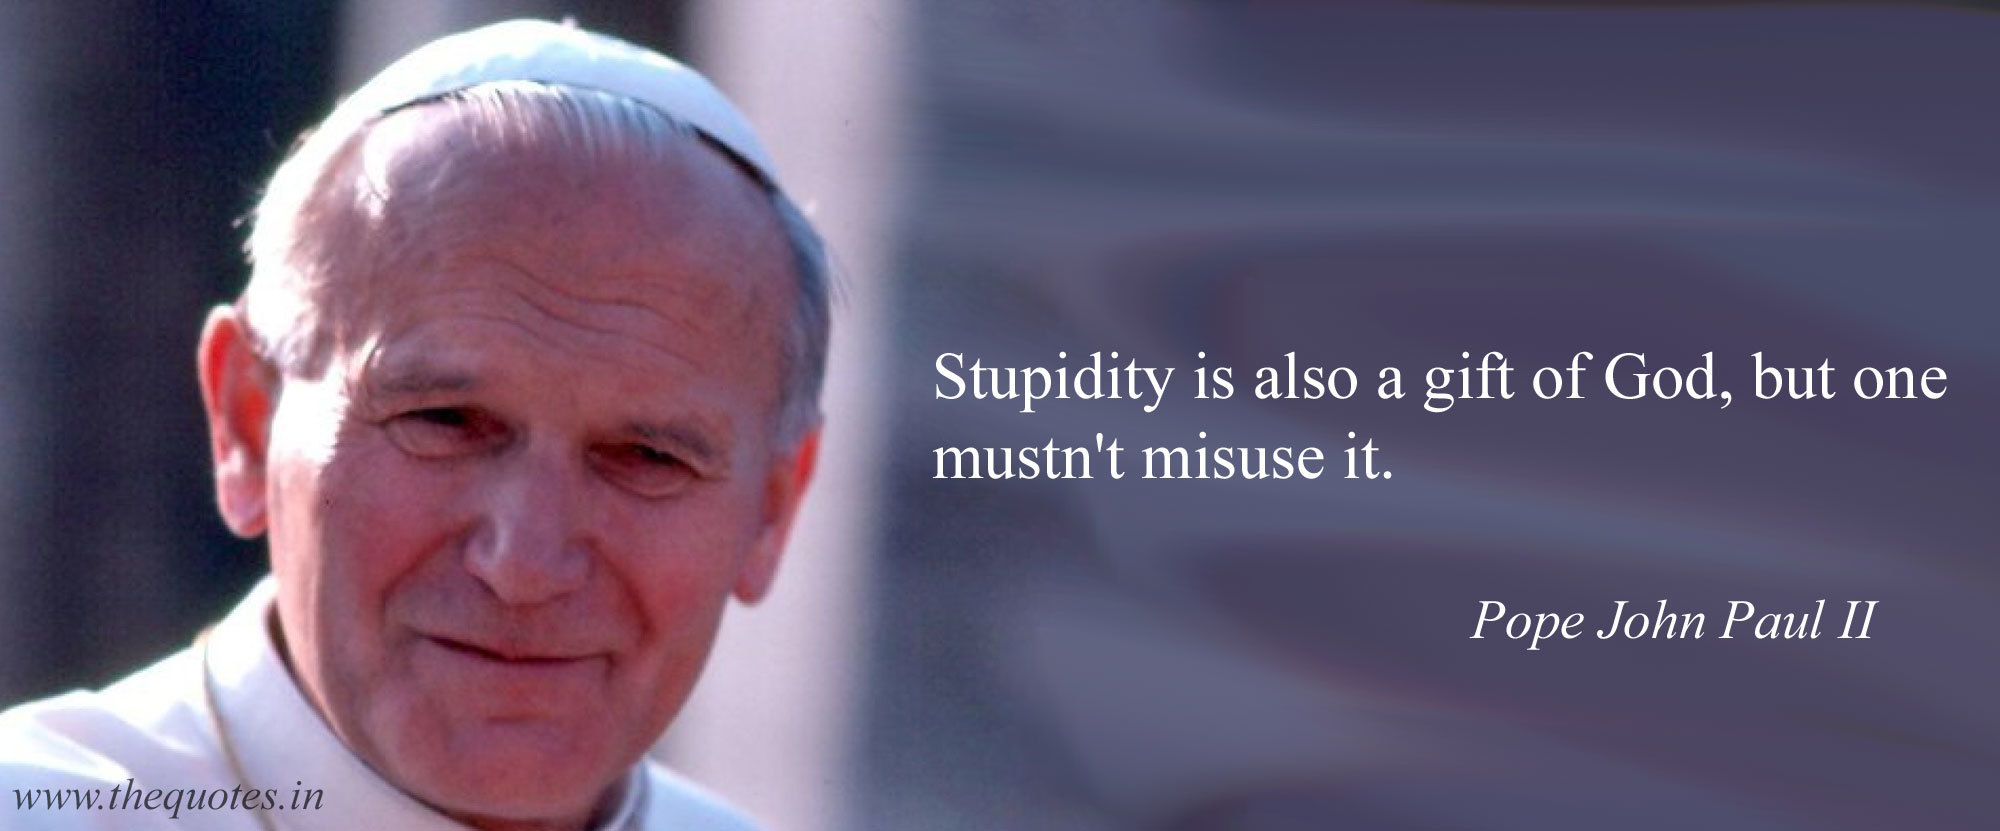 Click image for larger version  Name:	Pope-John-Paul-II-Quotes-4.jpg Views:	1 Size:	142,3 kB ID:	1731906